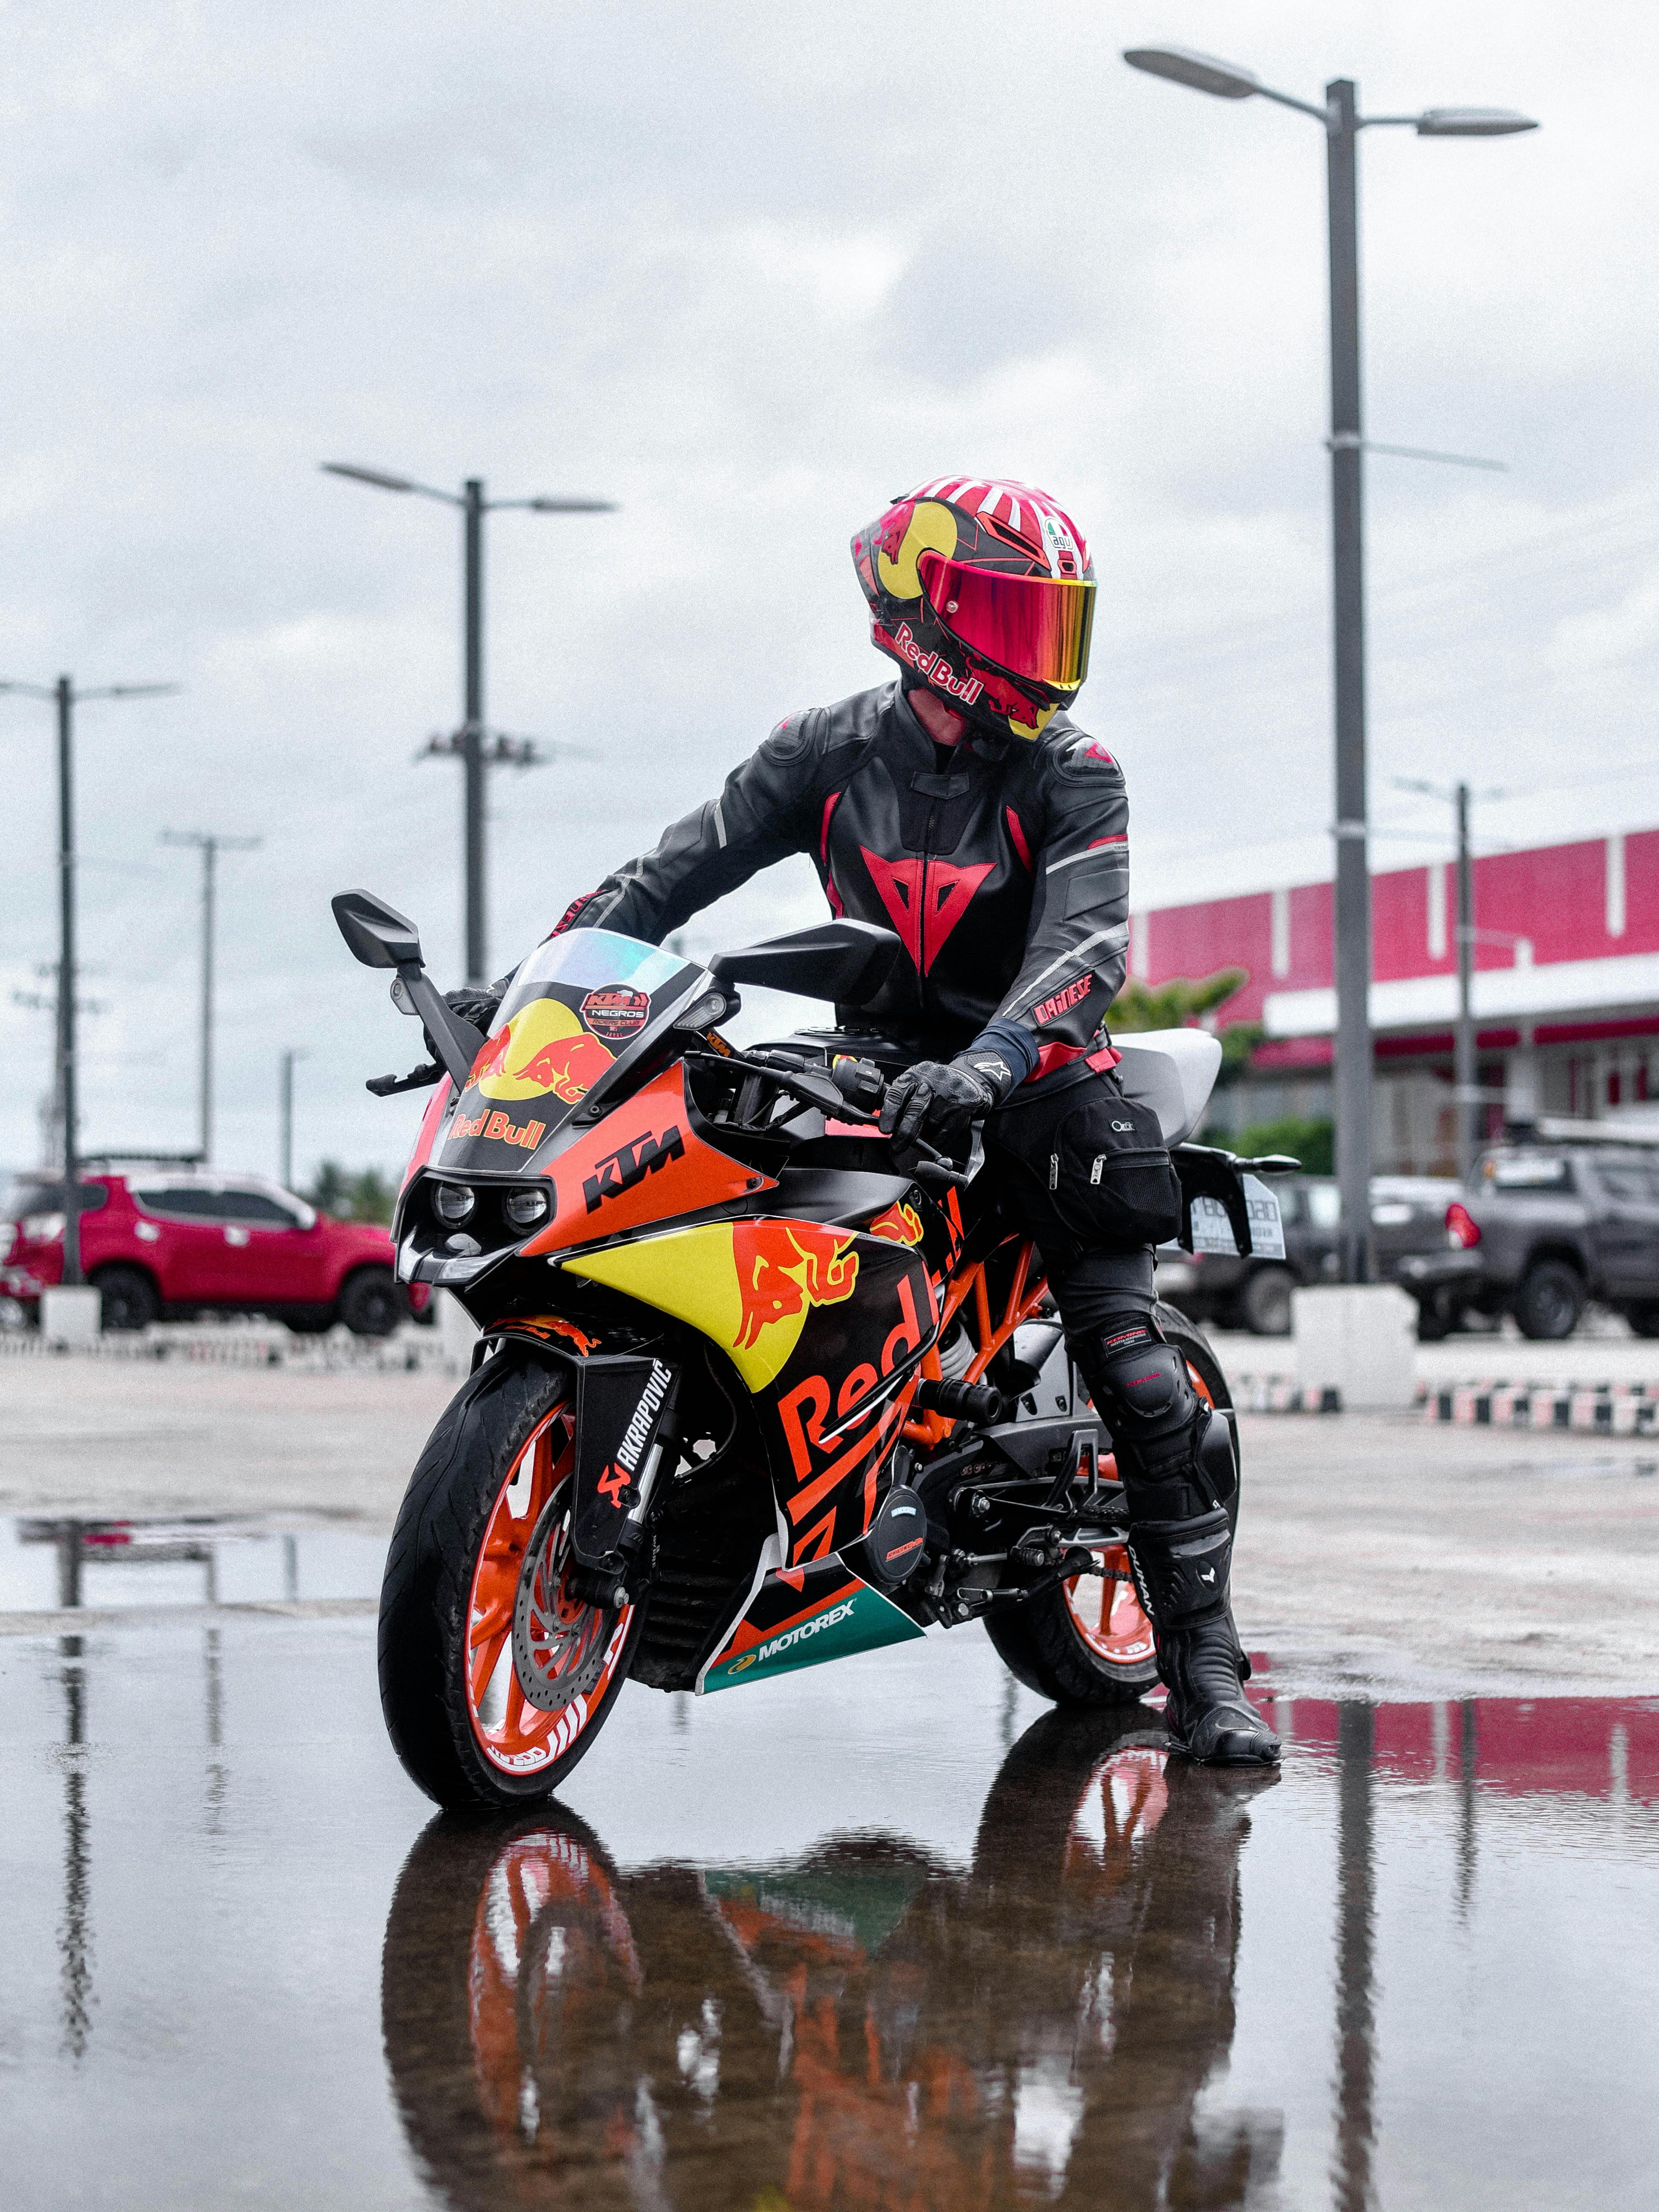 Have you ever regretted buying a KTM motorcycle? - Quora